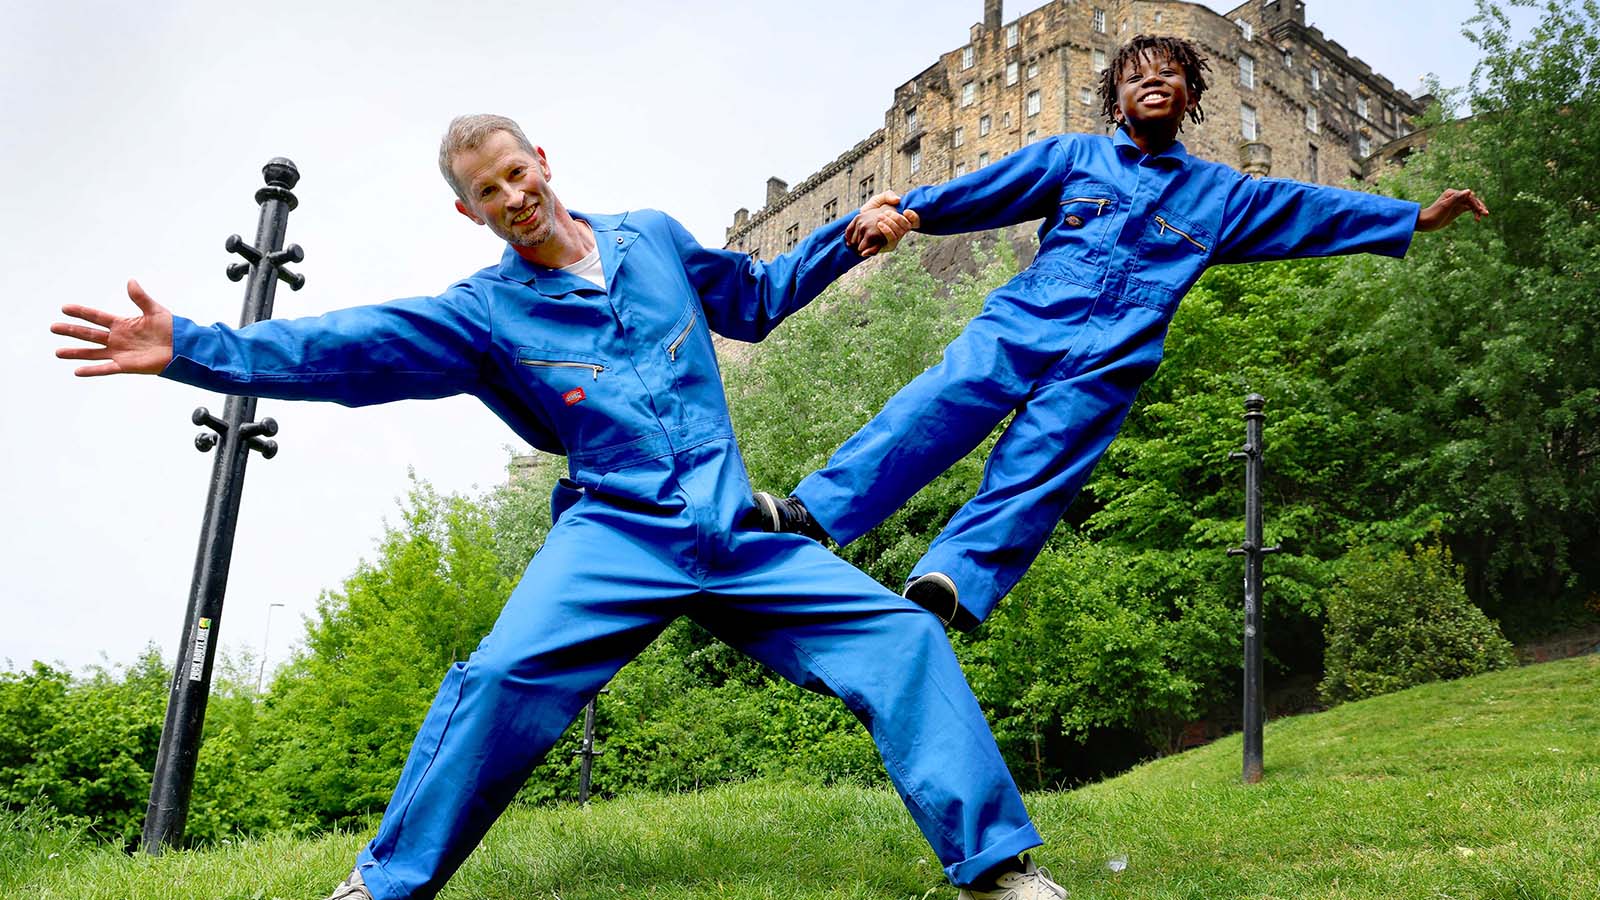 A man and a boy in bright blue jumpsuits in a garden. They are dancing joyfully with each other, striking a pose with the boy standing on the mans legs as they stay connected by holding hands.